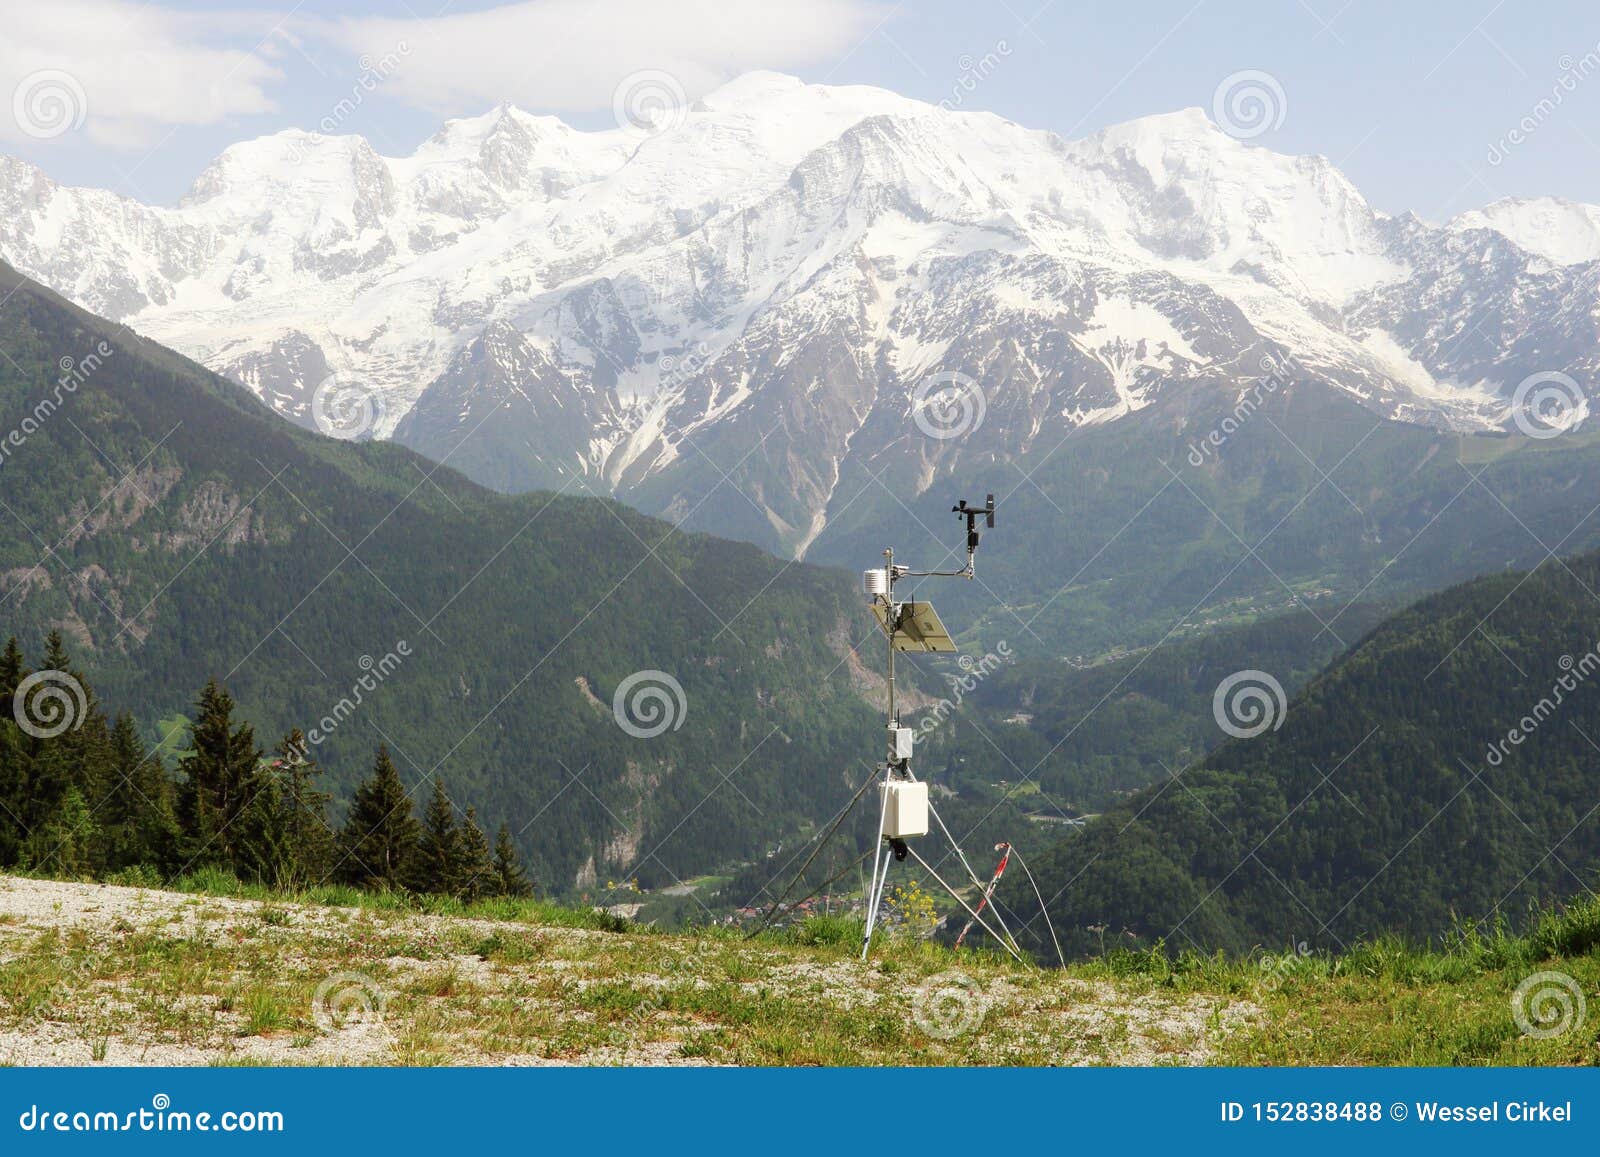 anemometer at parapente launching point, french plateau d`assy